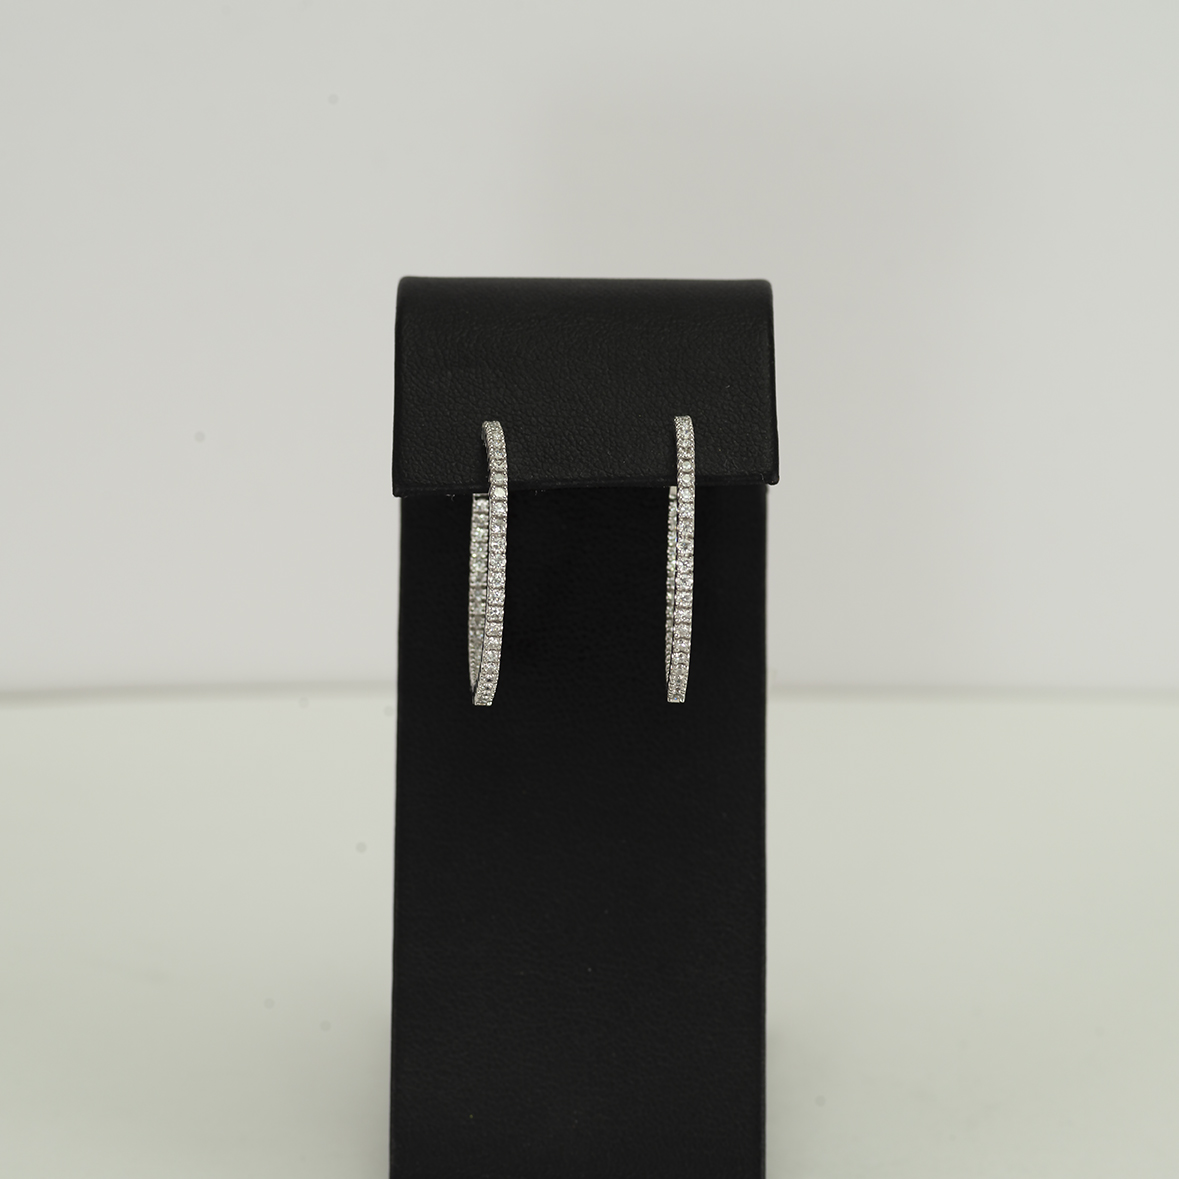 Here is a pair of in n' out diamond hoops set in 14kt white gold.